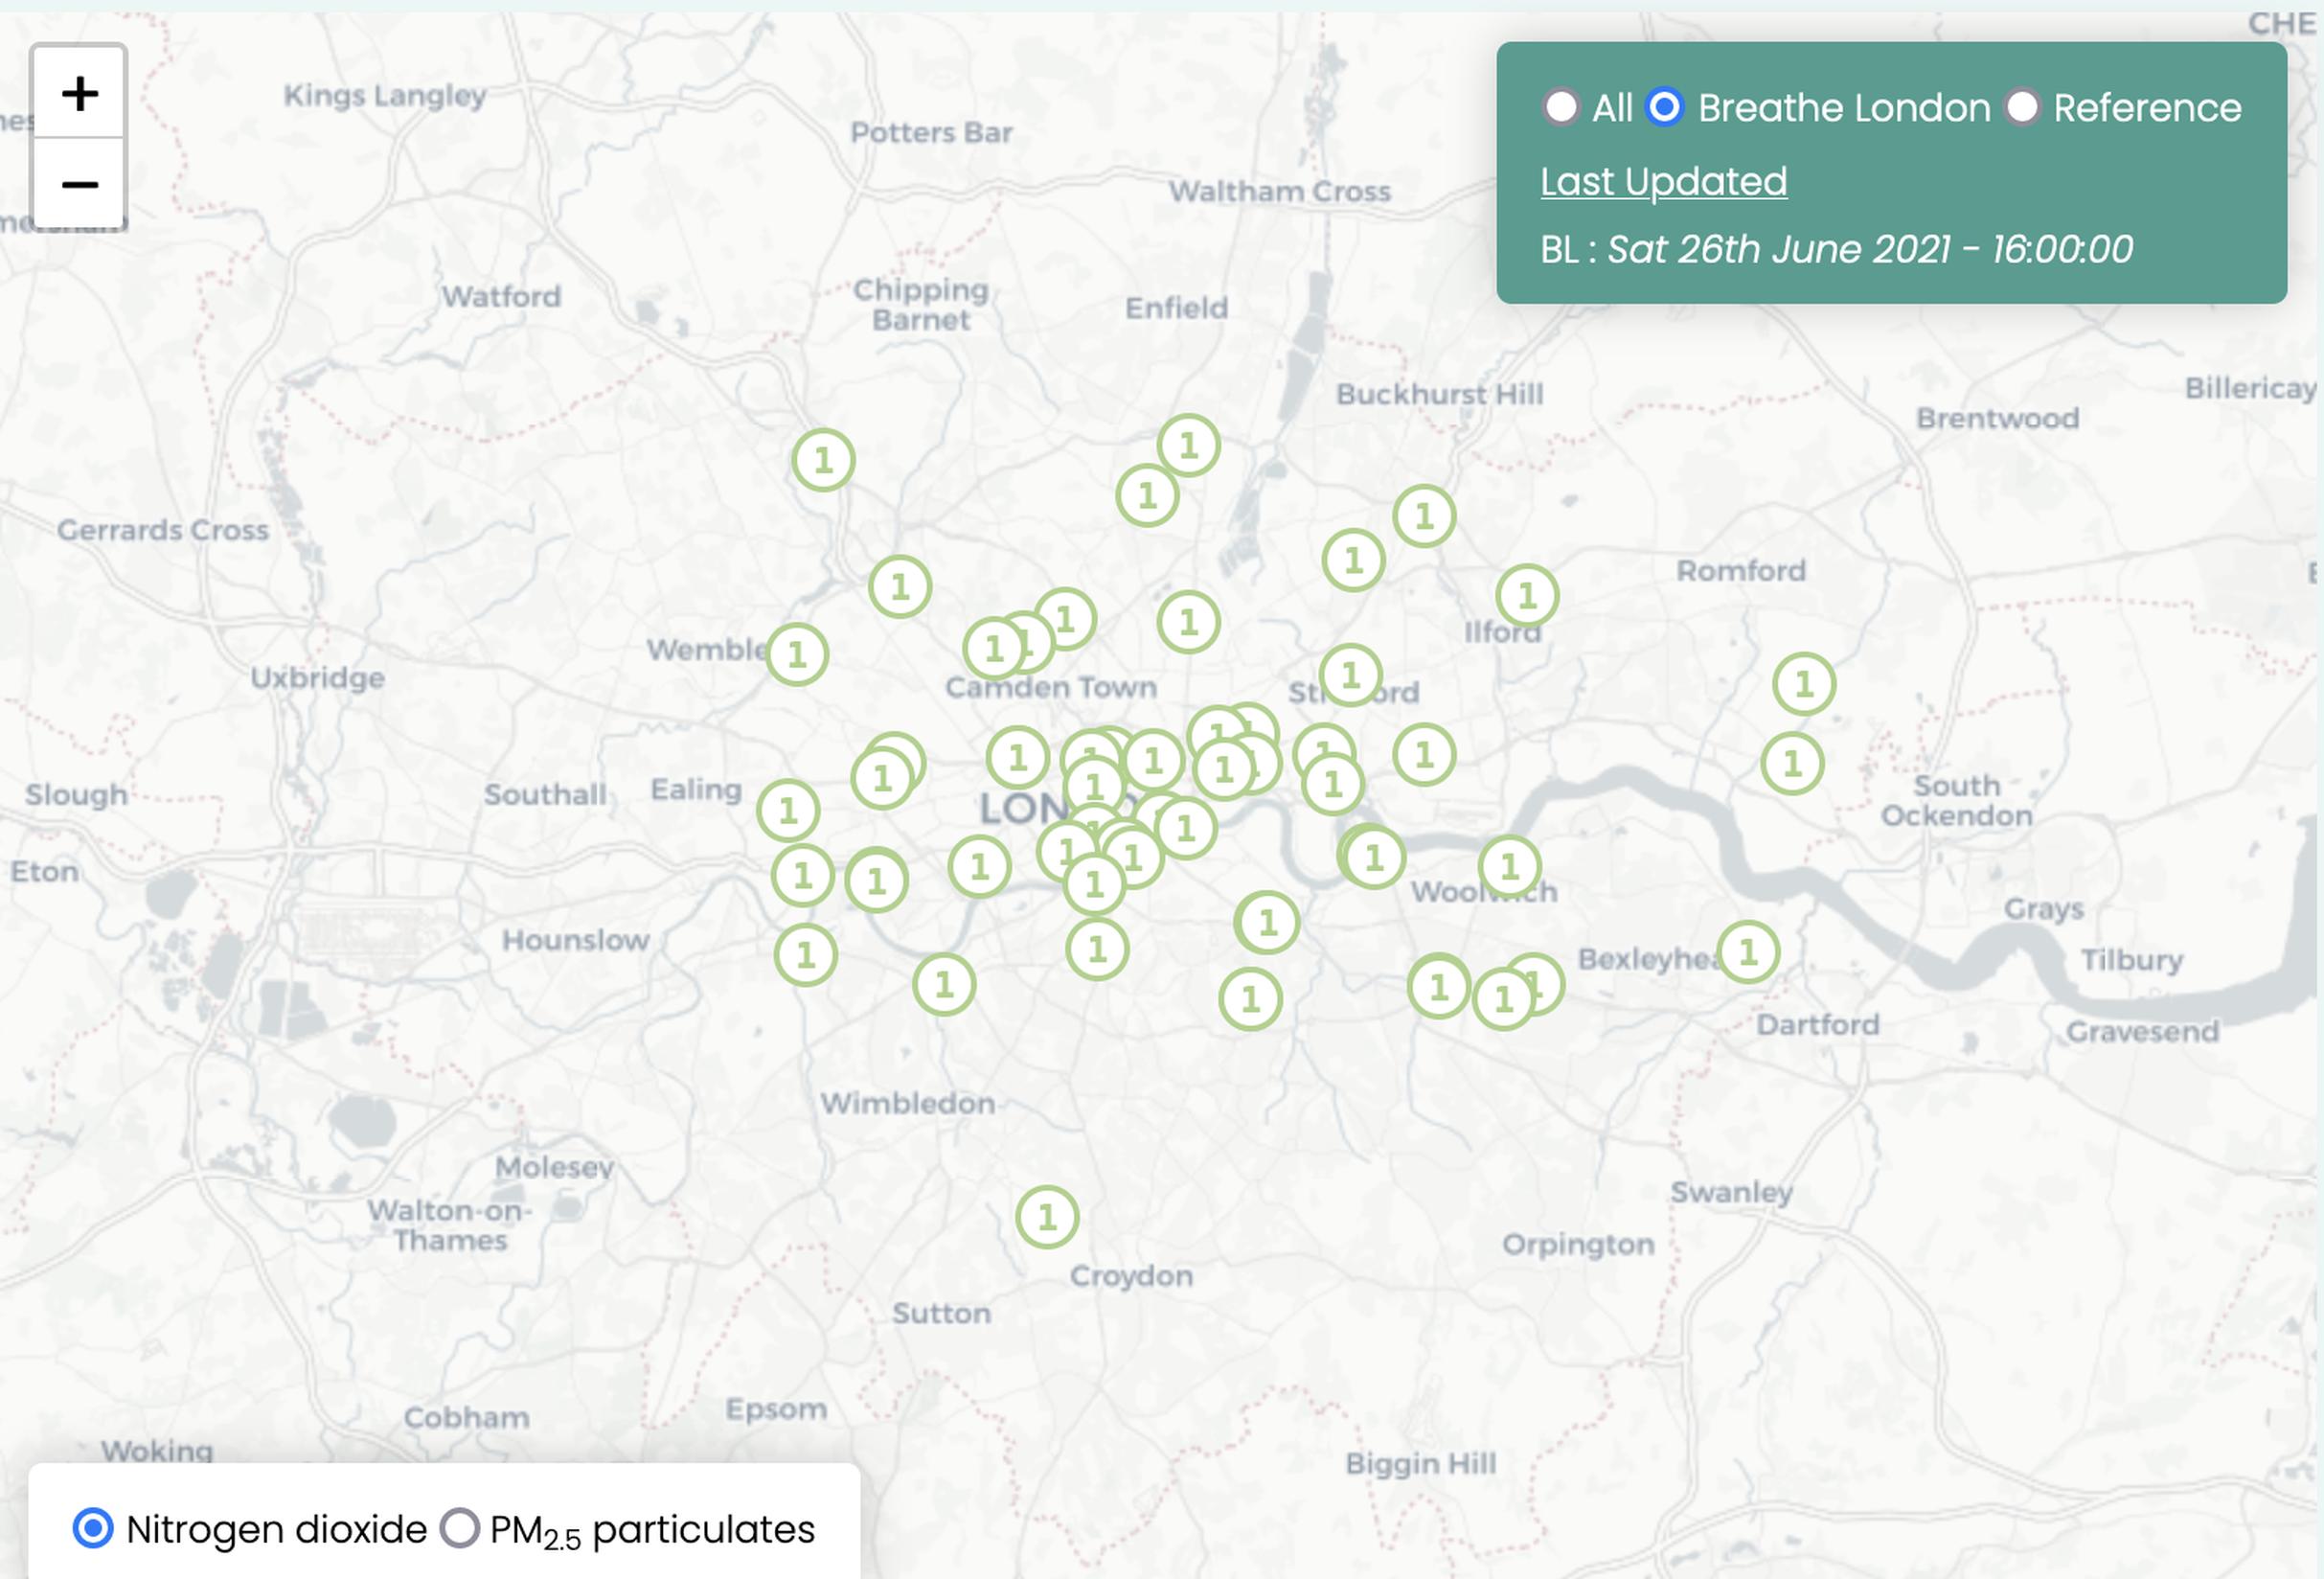 The Breathe London Network sensor network monitors the effects of pollution including high levels of nitrogen dioxide (NO2)